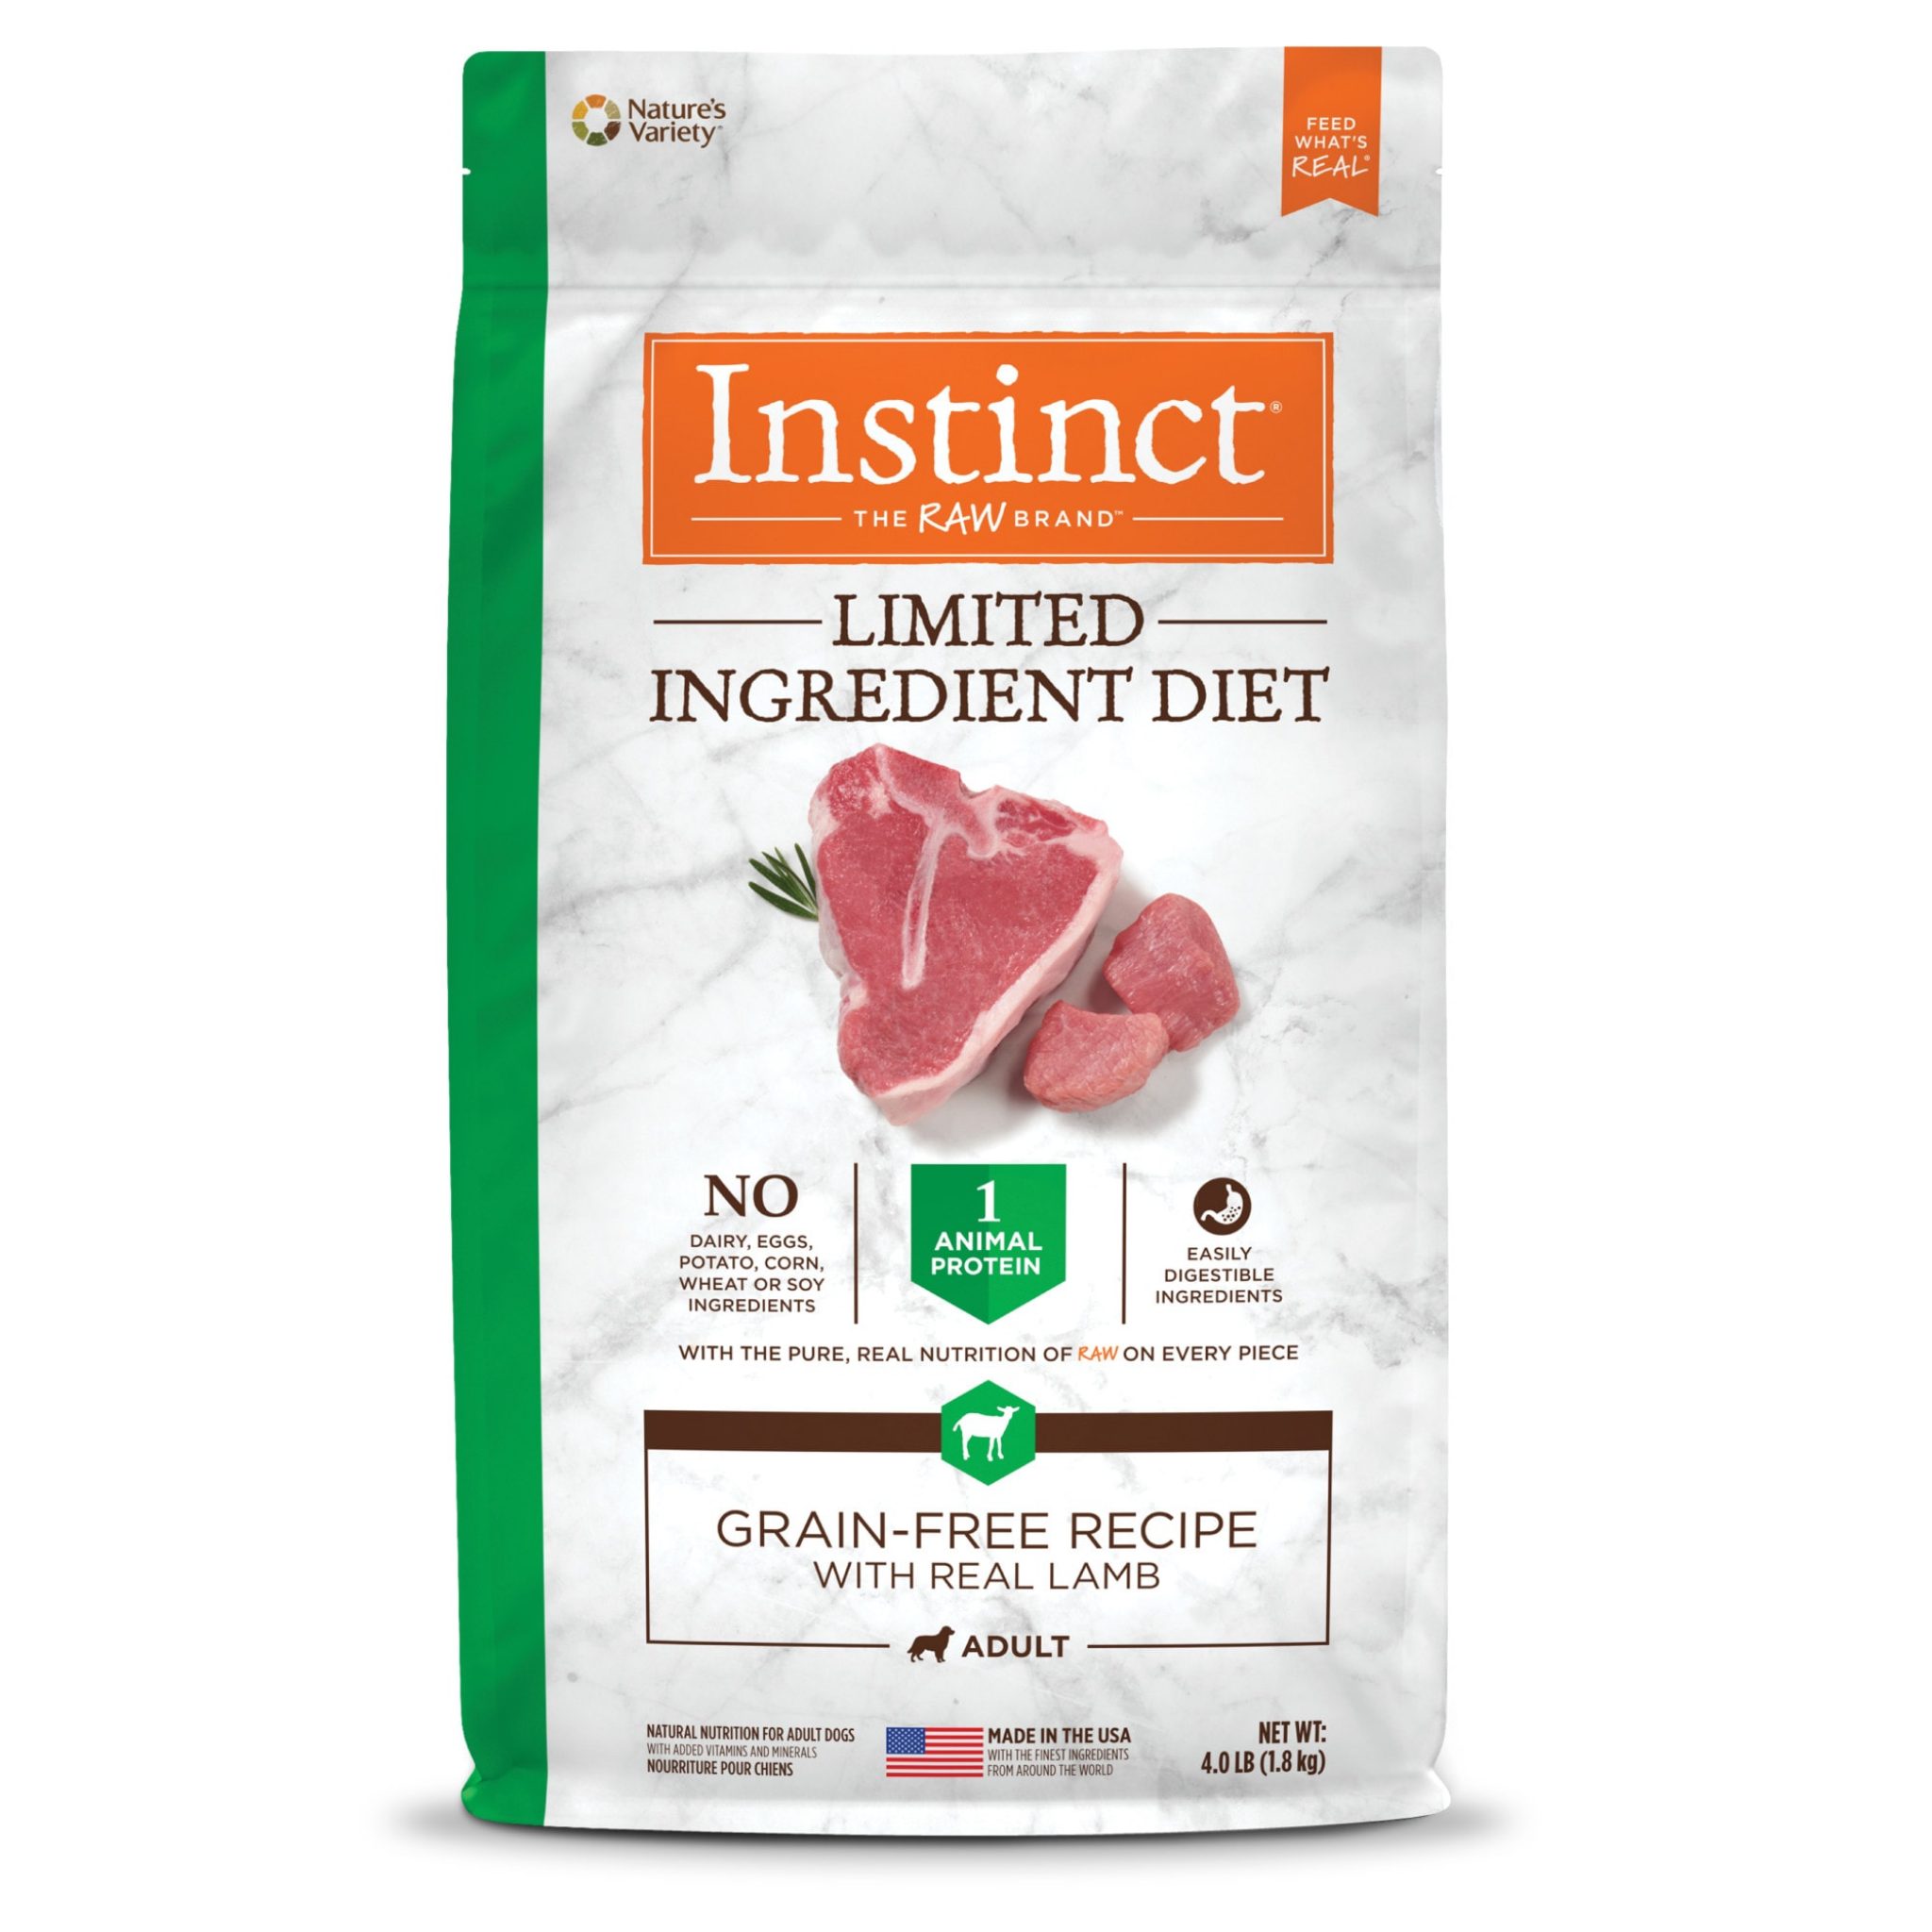 Instinct Limited Ingredient Diet GrainFree Recipe with Real Lamb